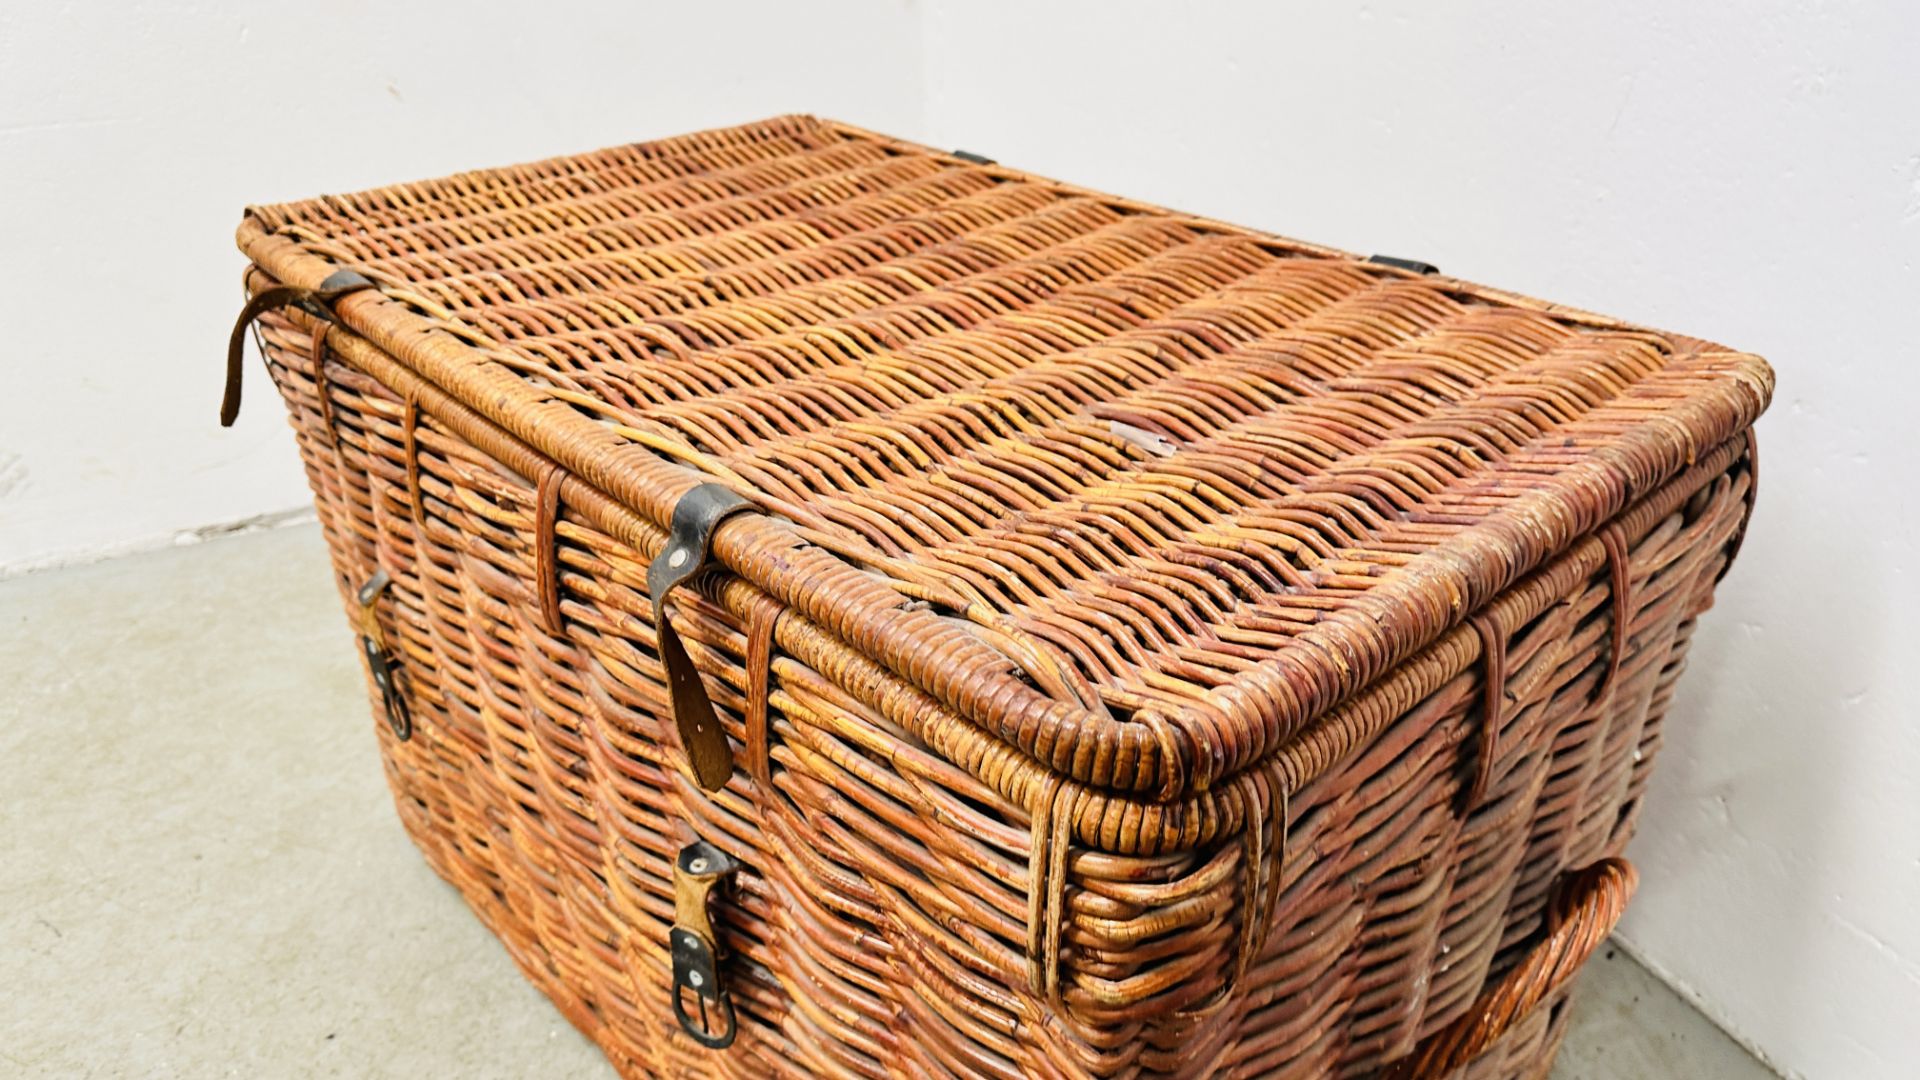 A LARGE WICKER TWO HANDLED BASKET - W 90 X D 55 X H 55CM. - Image 4 of 7